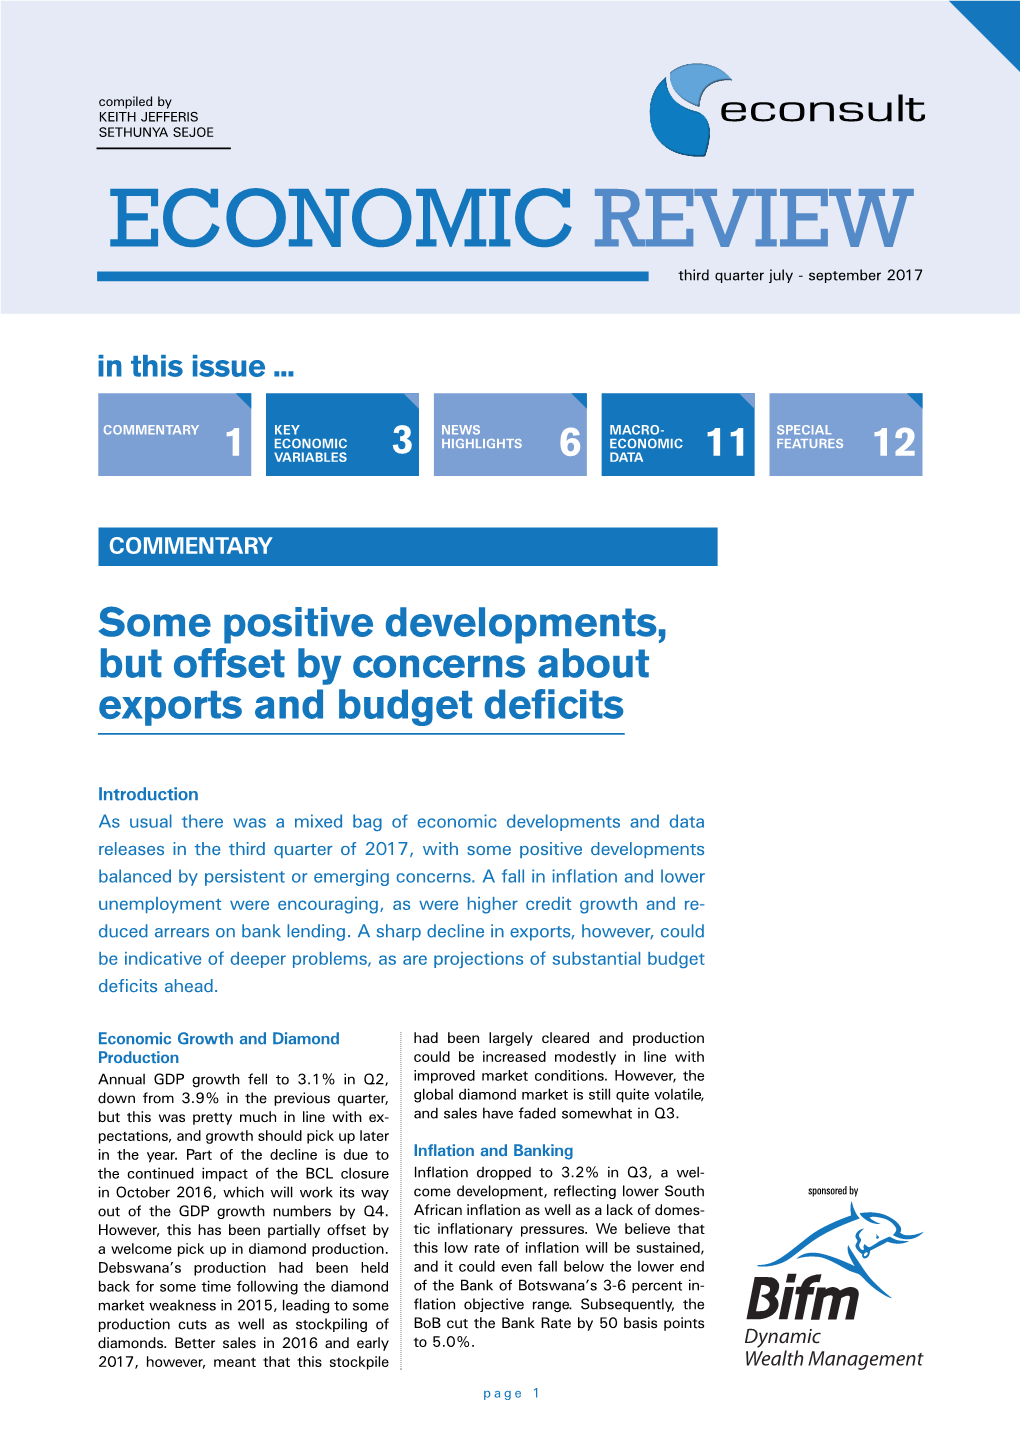 ECONOMIC REVIEW Third Quarter July - September 2017 in This Issue